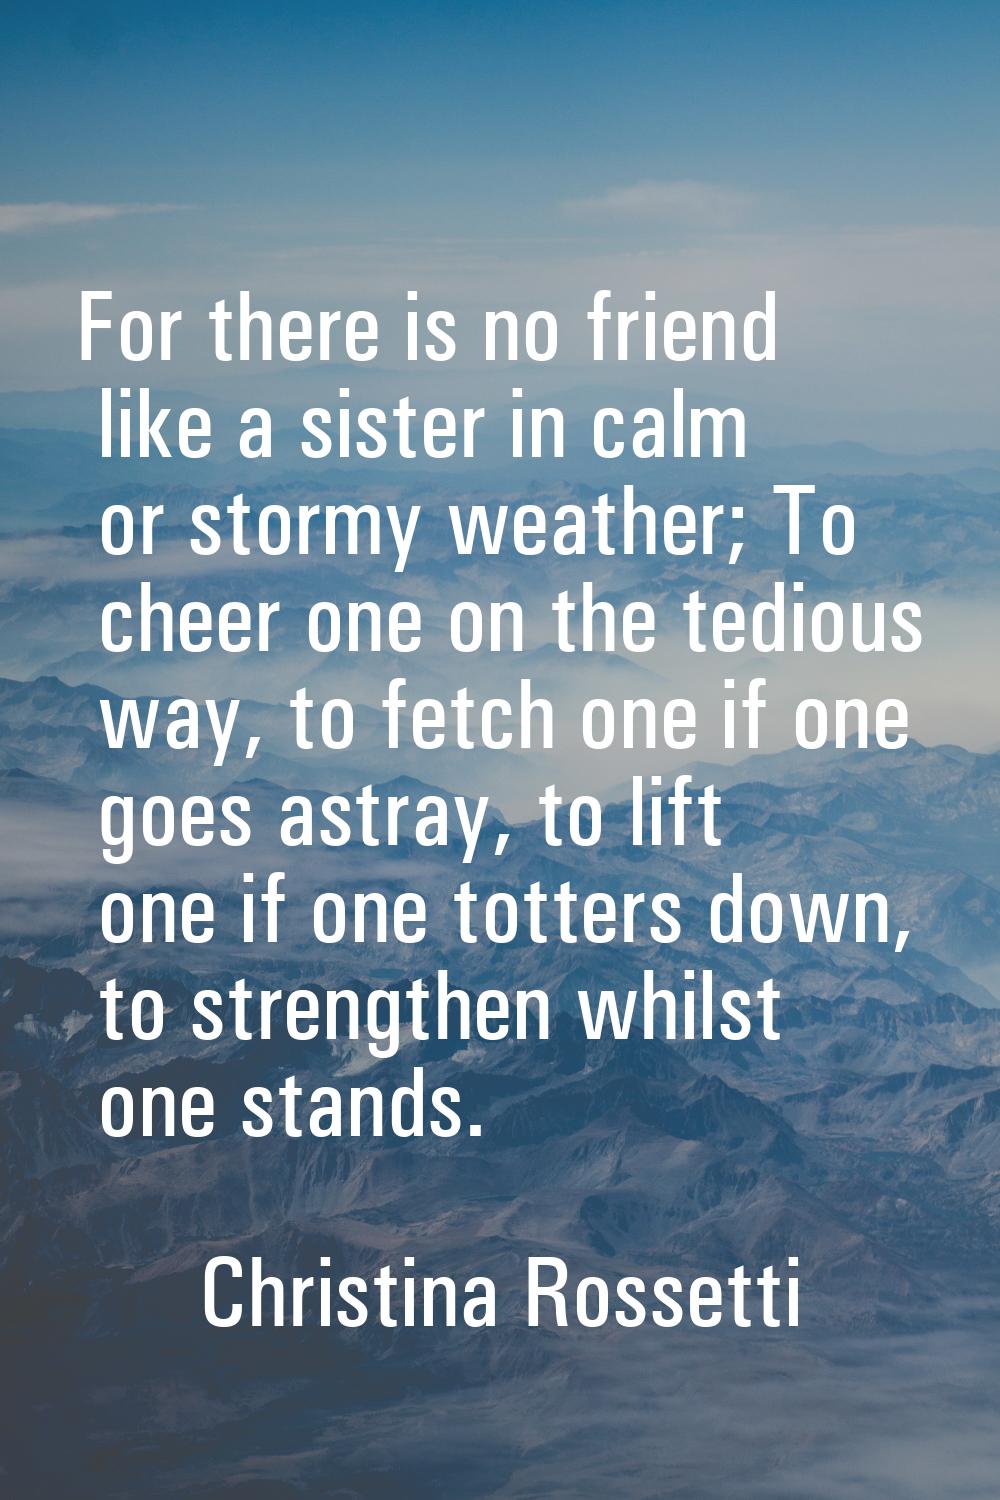 For there is no friend like a sister in calm or stormy weather; To cheer one on the tedious way, to